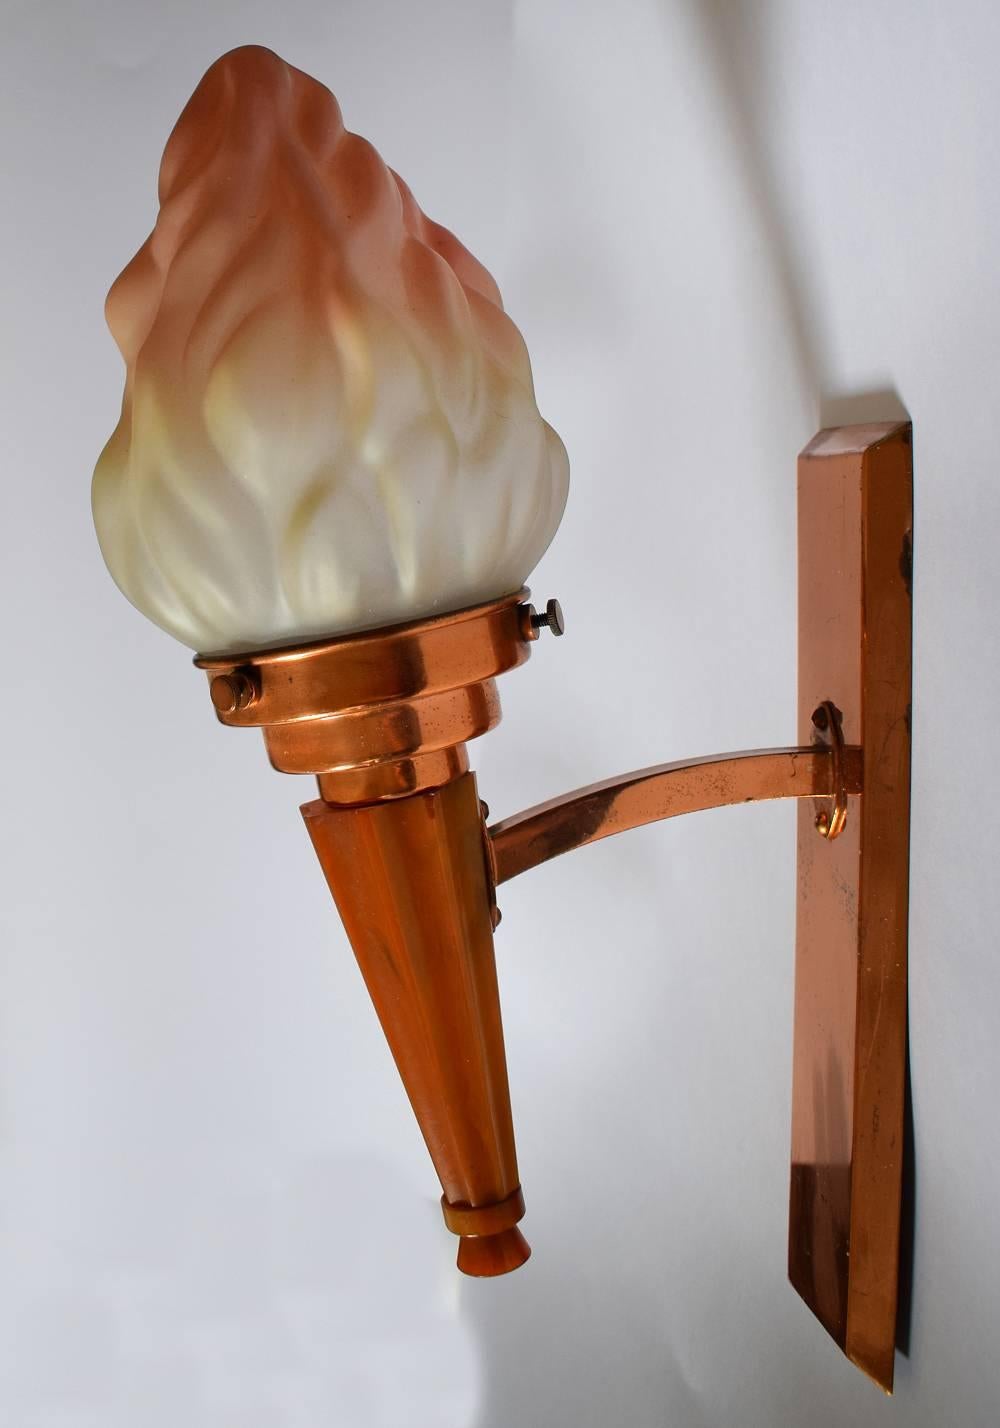 Very attractive 1930s Art Deco pair of English matching wall lights. These high style wall lights feature a single arm catalin bakelite stem, copper back plate with frosted tinted glass flame shade. These lights look as impressive switched on or off.